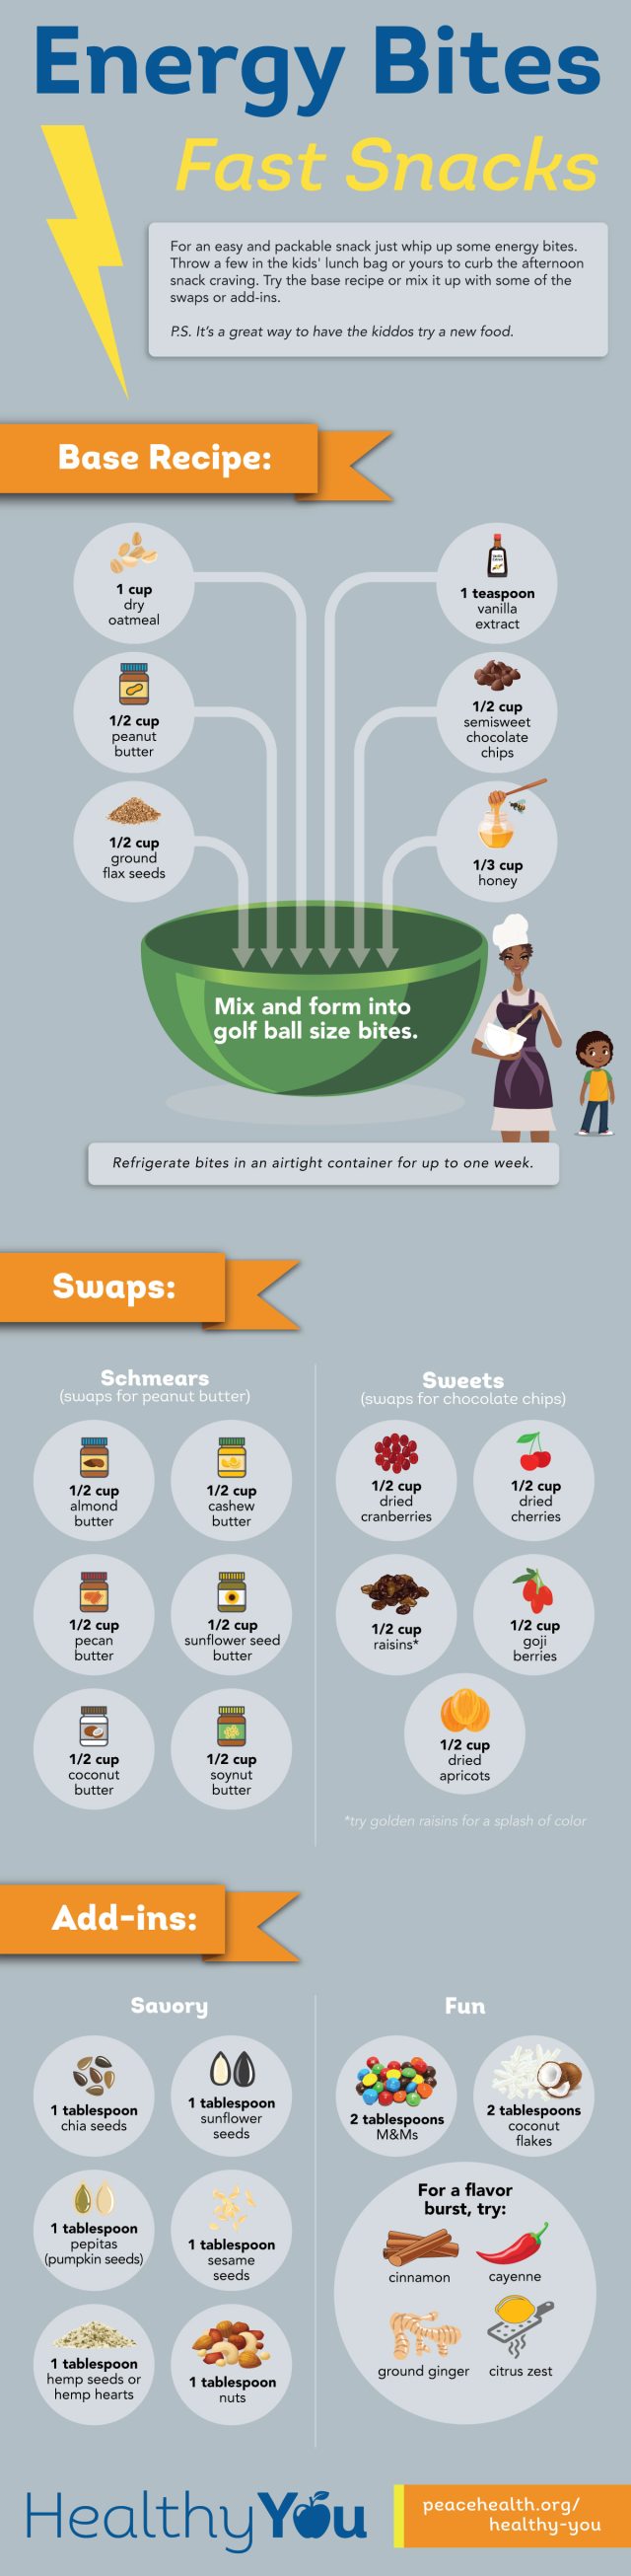 Infographic: Energy Bites, information about Fast Snacks (recipes)